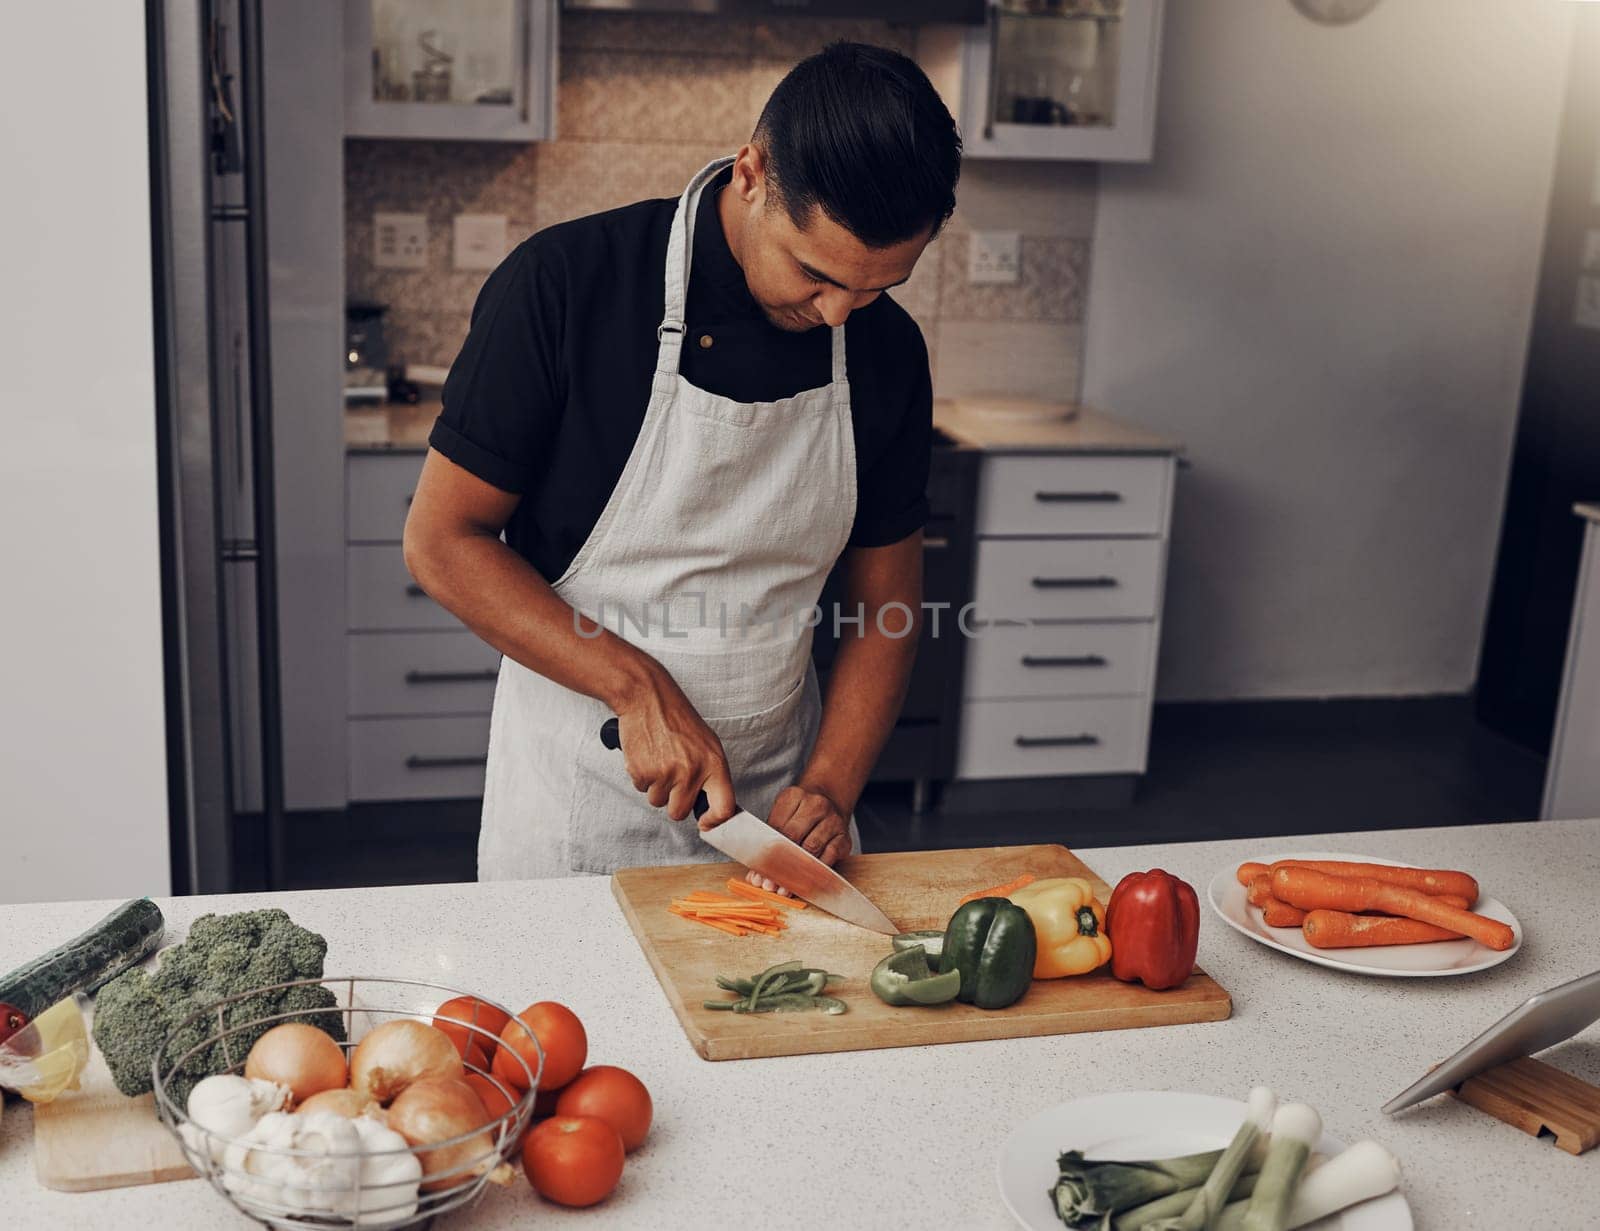 Cooking, food and vegetables with a man cutting ingredients in the kitchen on a wooden chopping board. Salad, health and diet with a male chef preparing a meal while standing alone in his home.